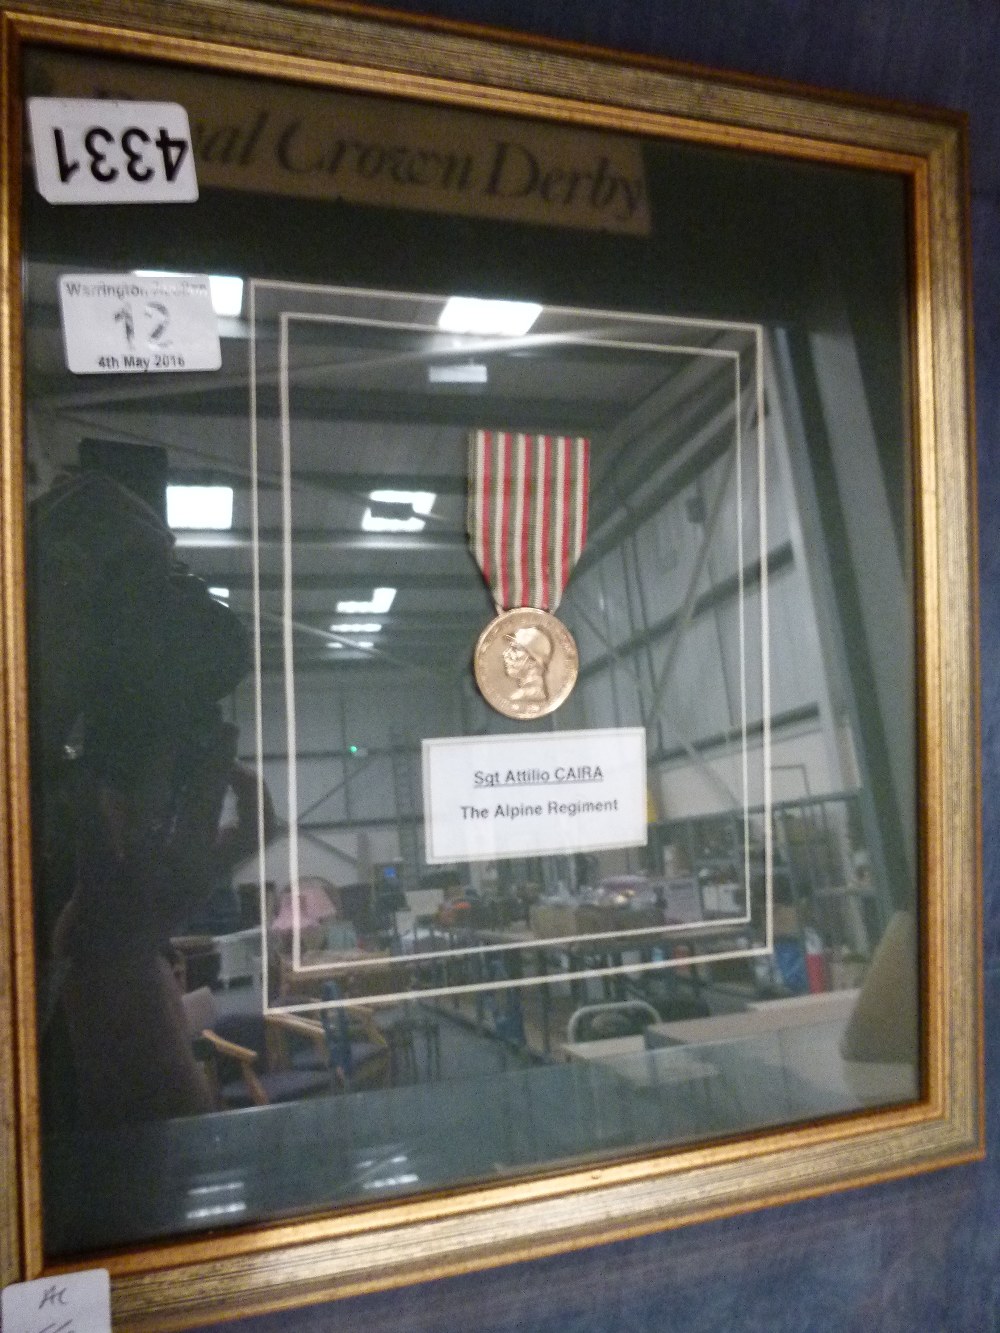 Framed Italian medal presented to Sgt Attilio Caira from the Alpine Regiment